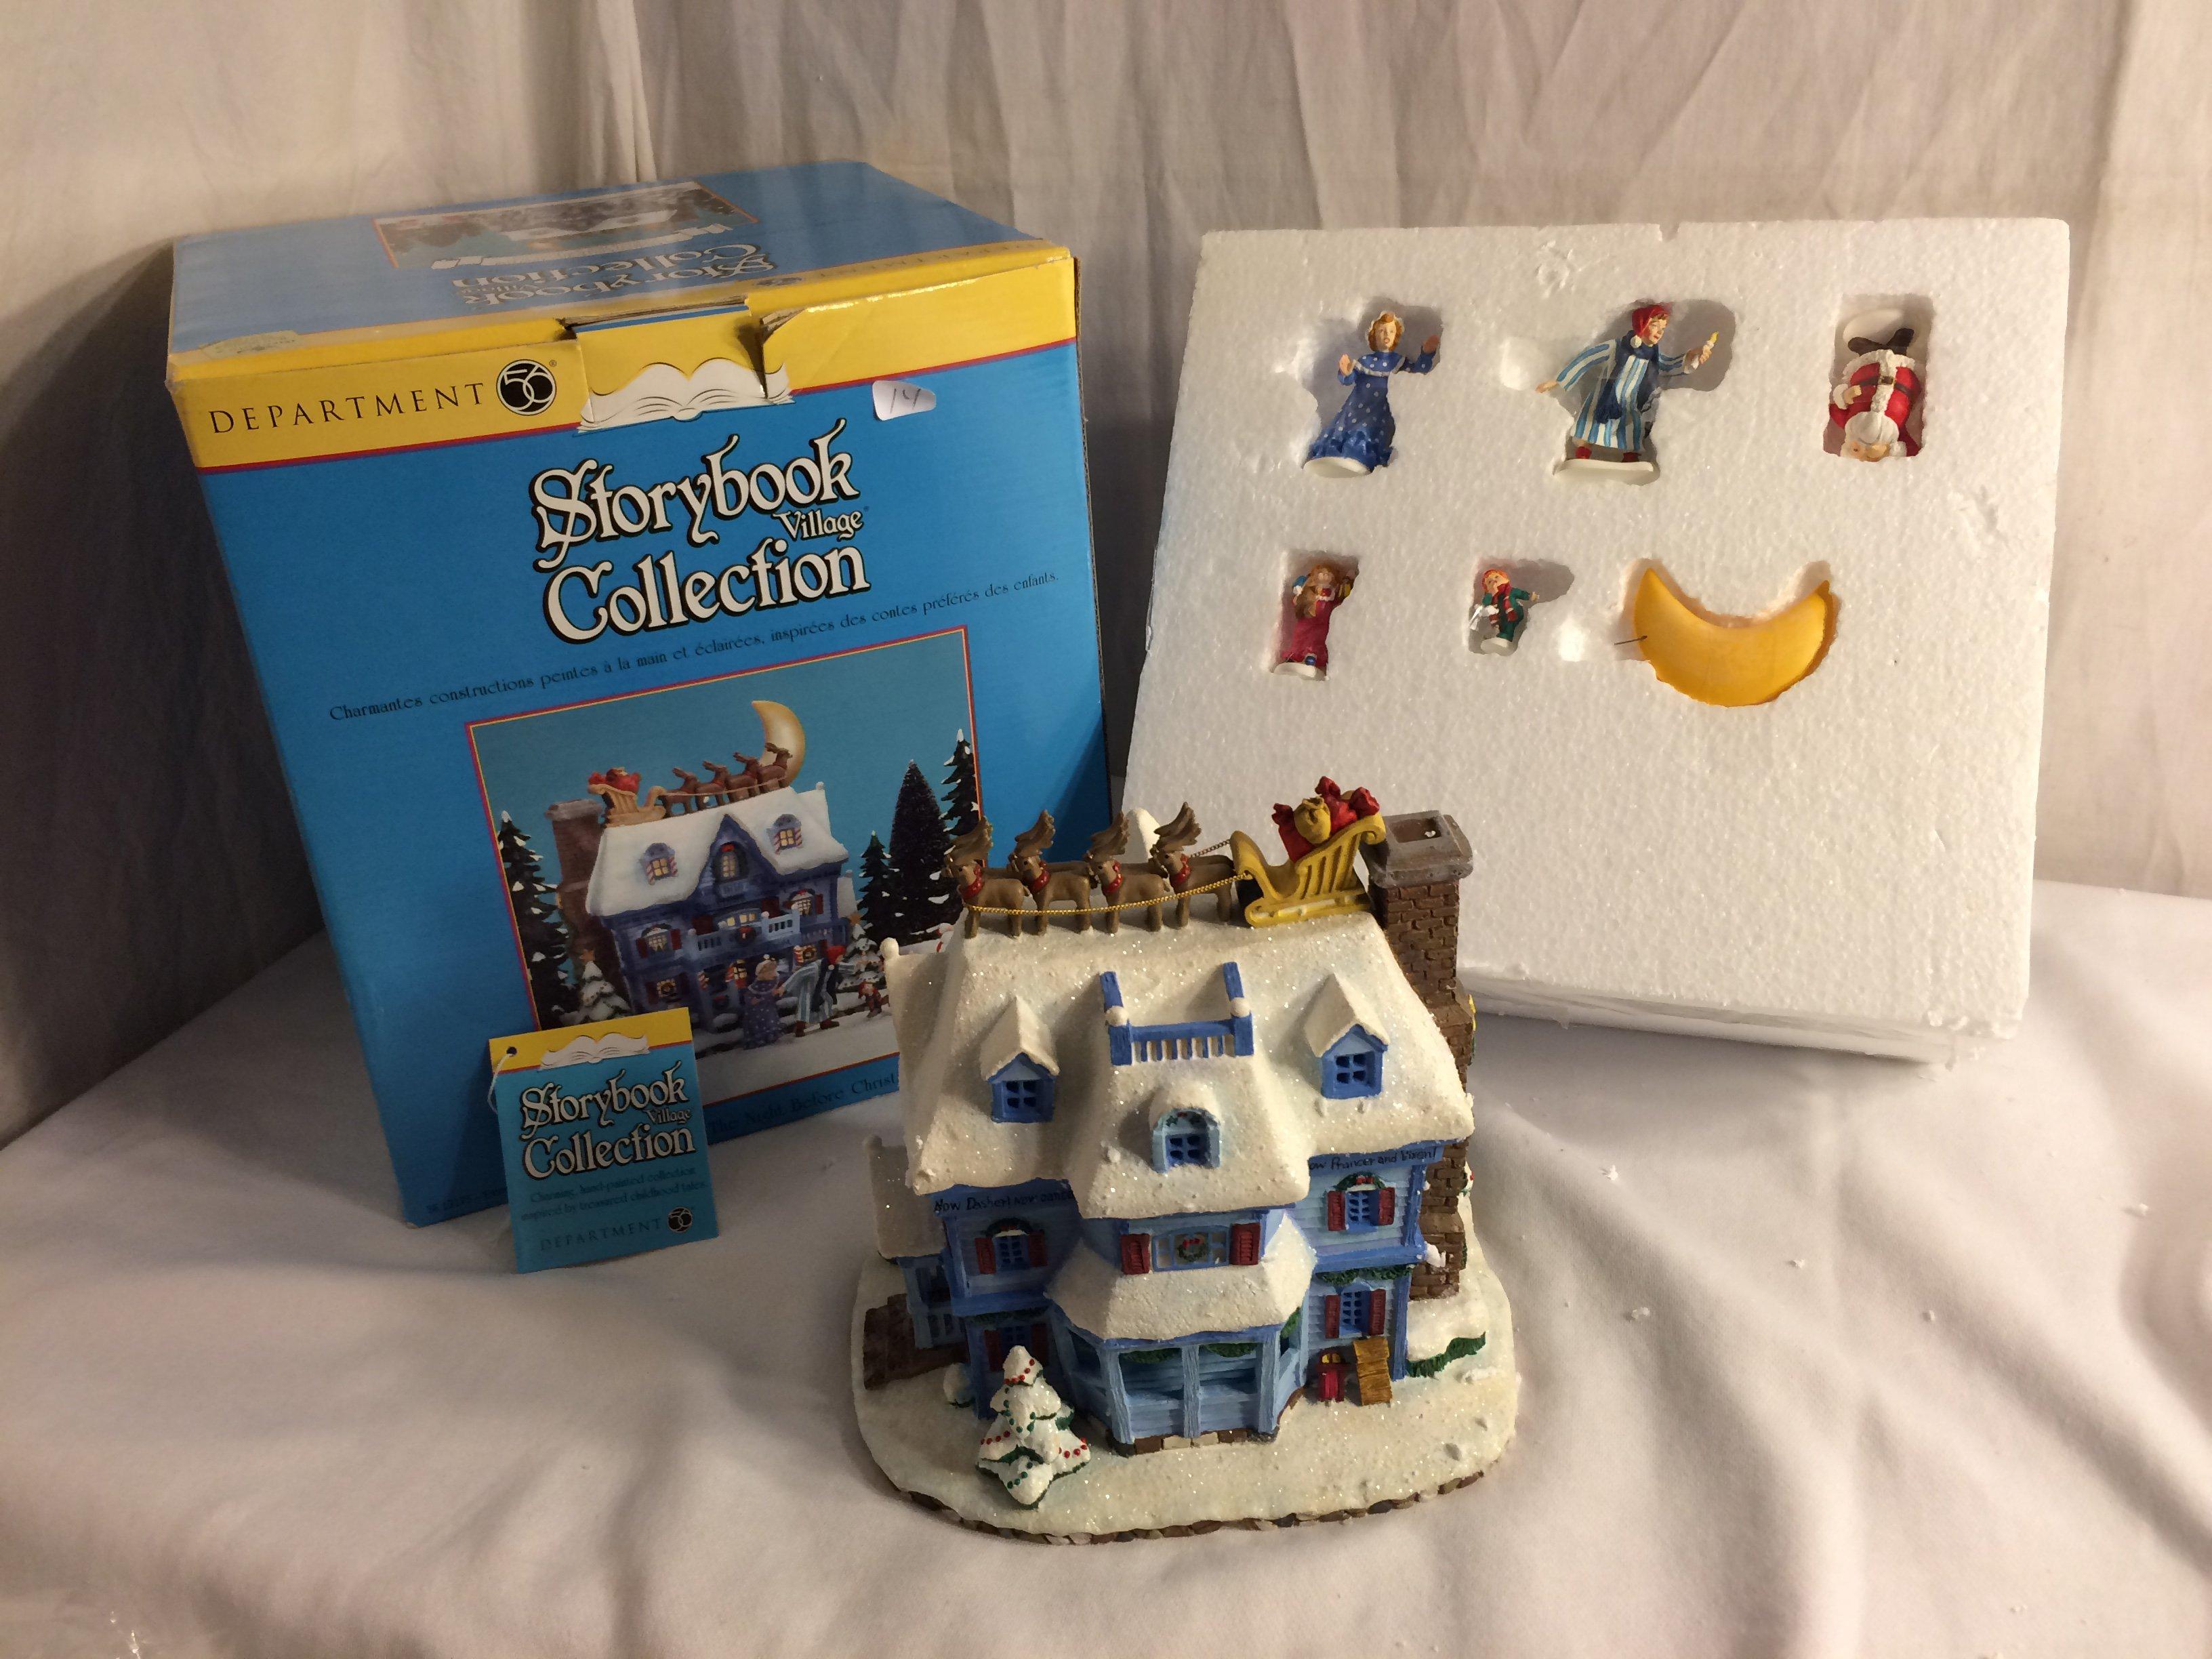 Storybook Village Collection "Twas The Night Before Christmas" 56.13175- Set of 6 Missing Light 11"x